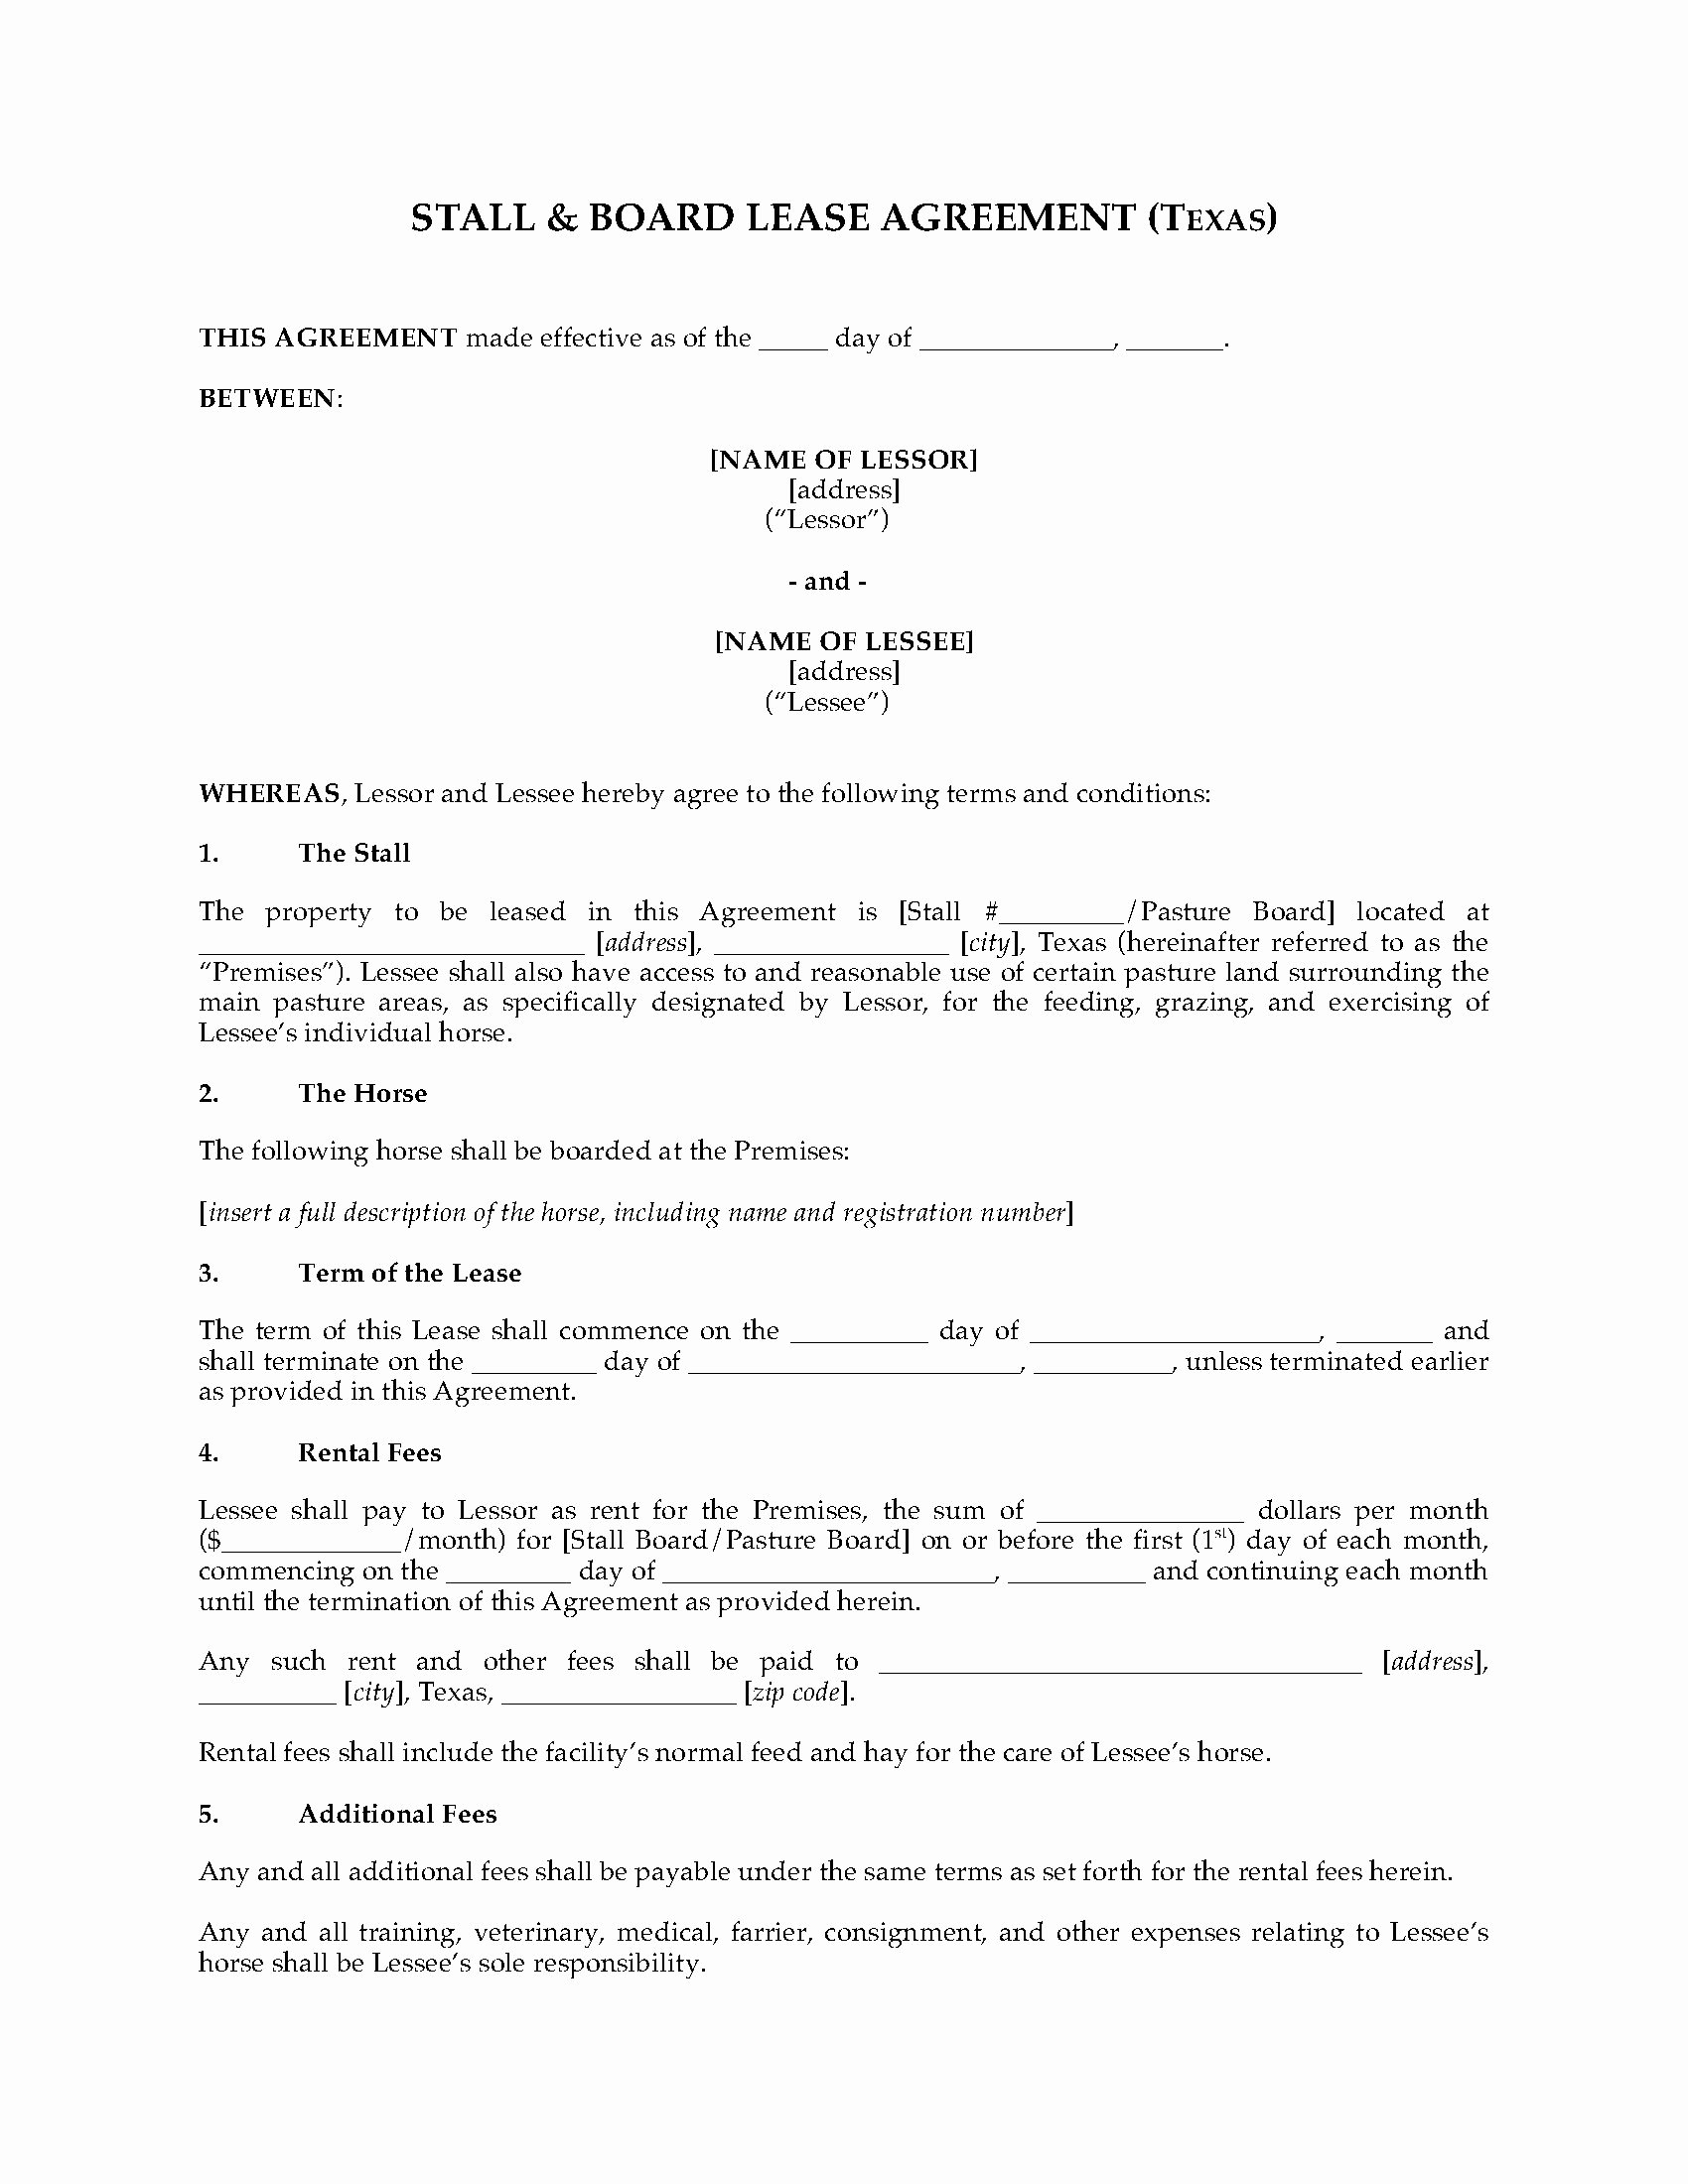 Horse Lease Agreements Template Lovely Texas Horse Boarding and Stall Lease Agreement